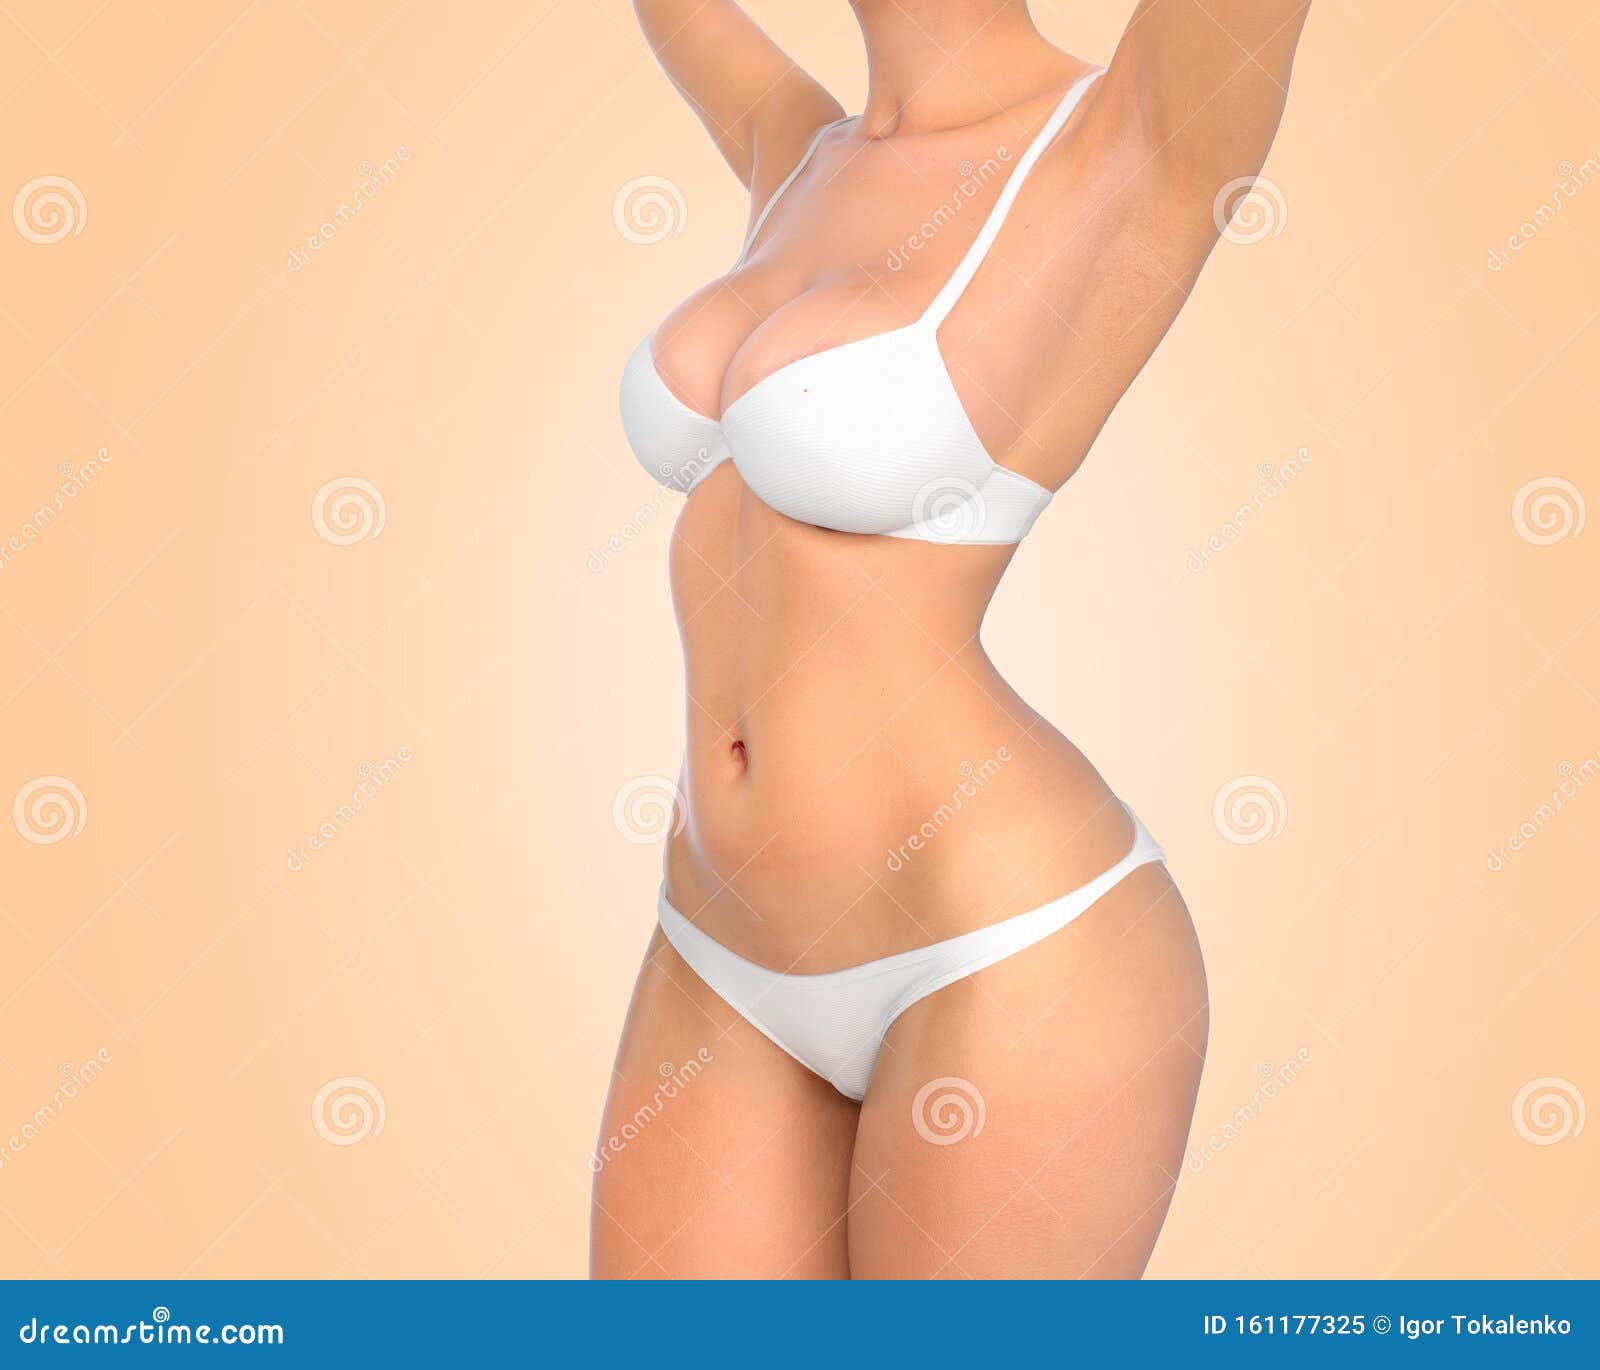 Perfect Body of Slim Fit and Sporty Woman in Underwear Isolated on Color  Gradient 3d Render Stock Illustration - Illustration of honed, female:  161177325